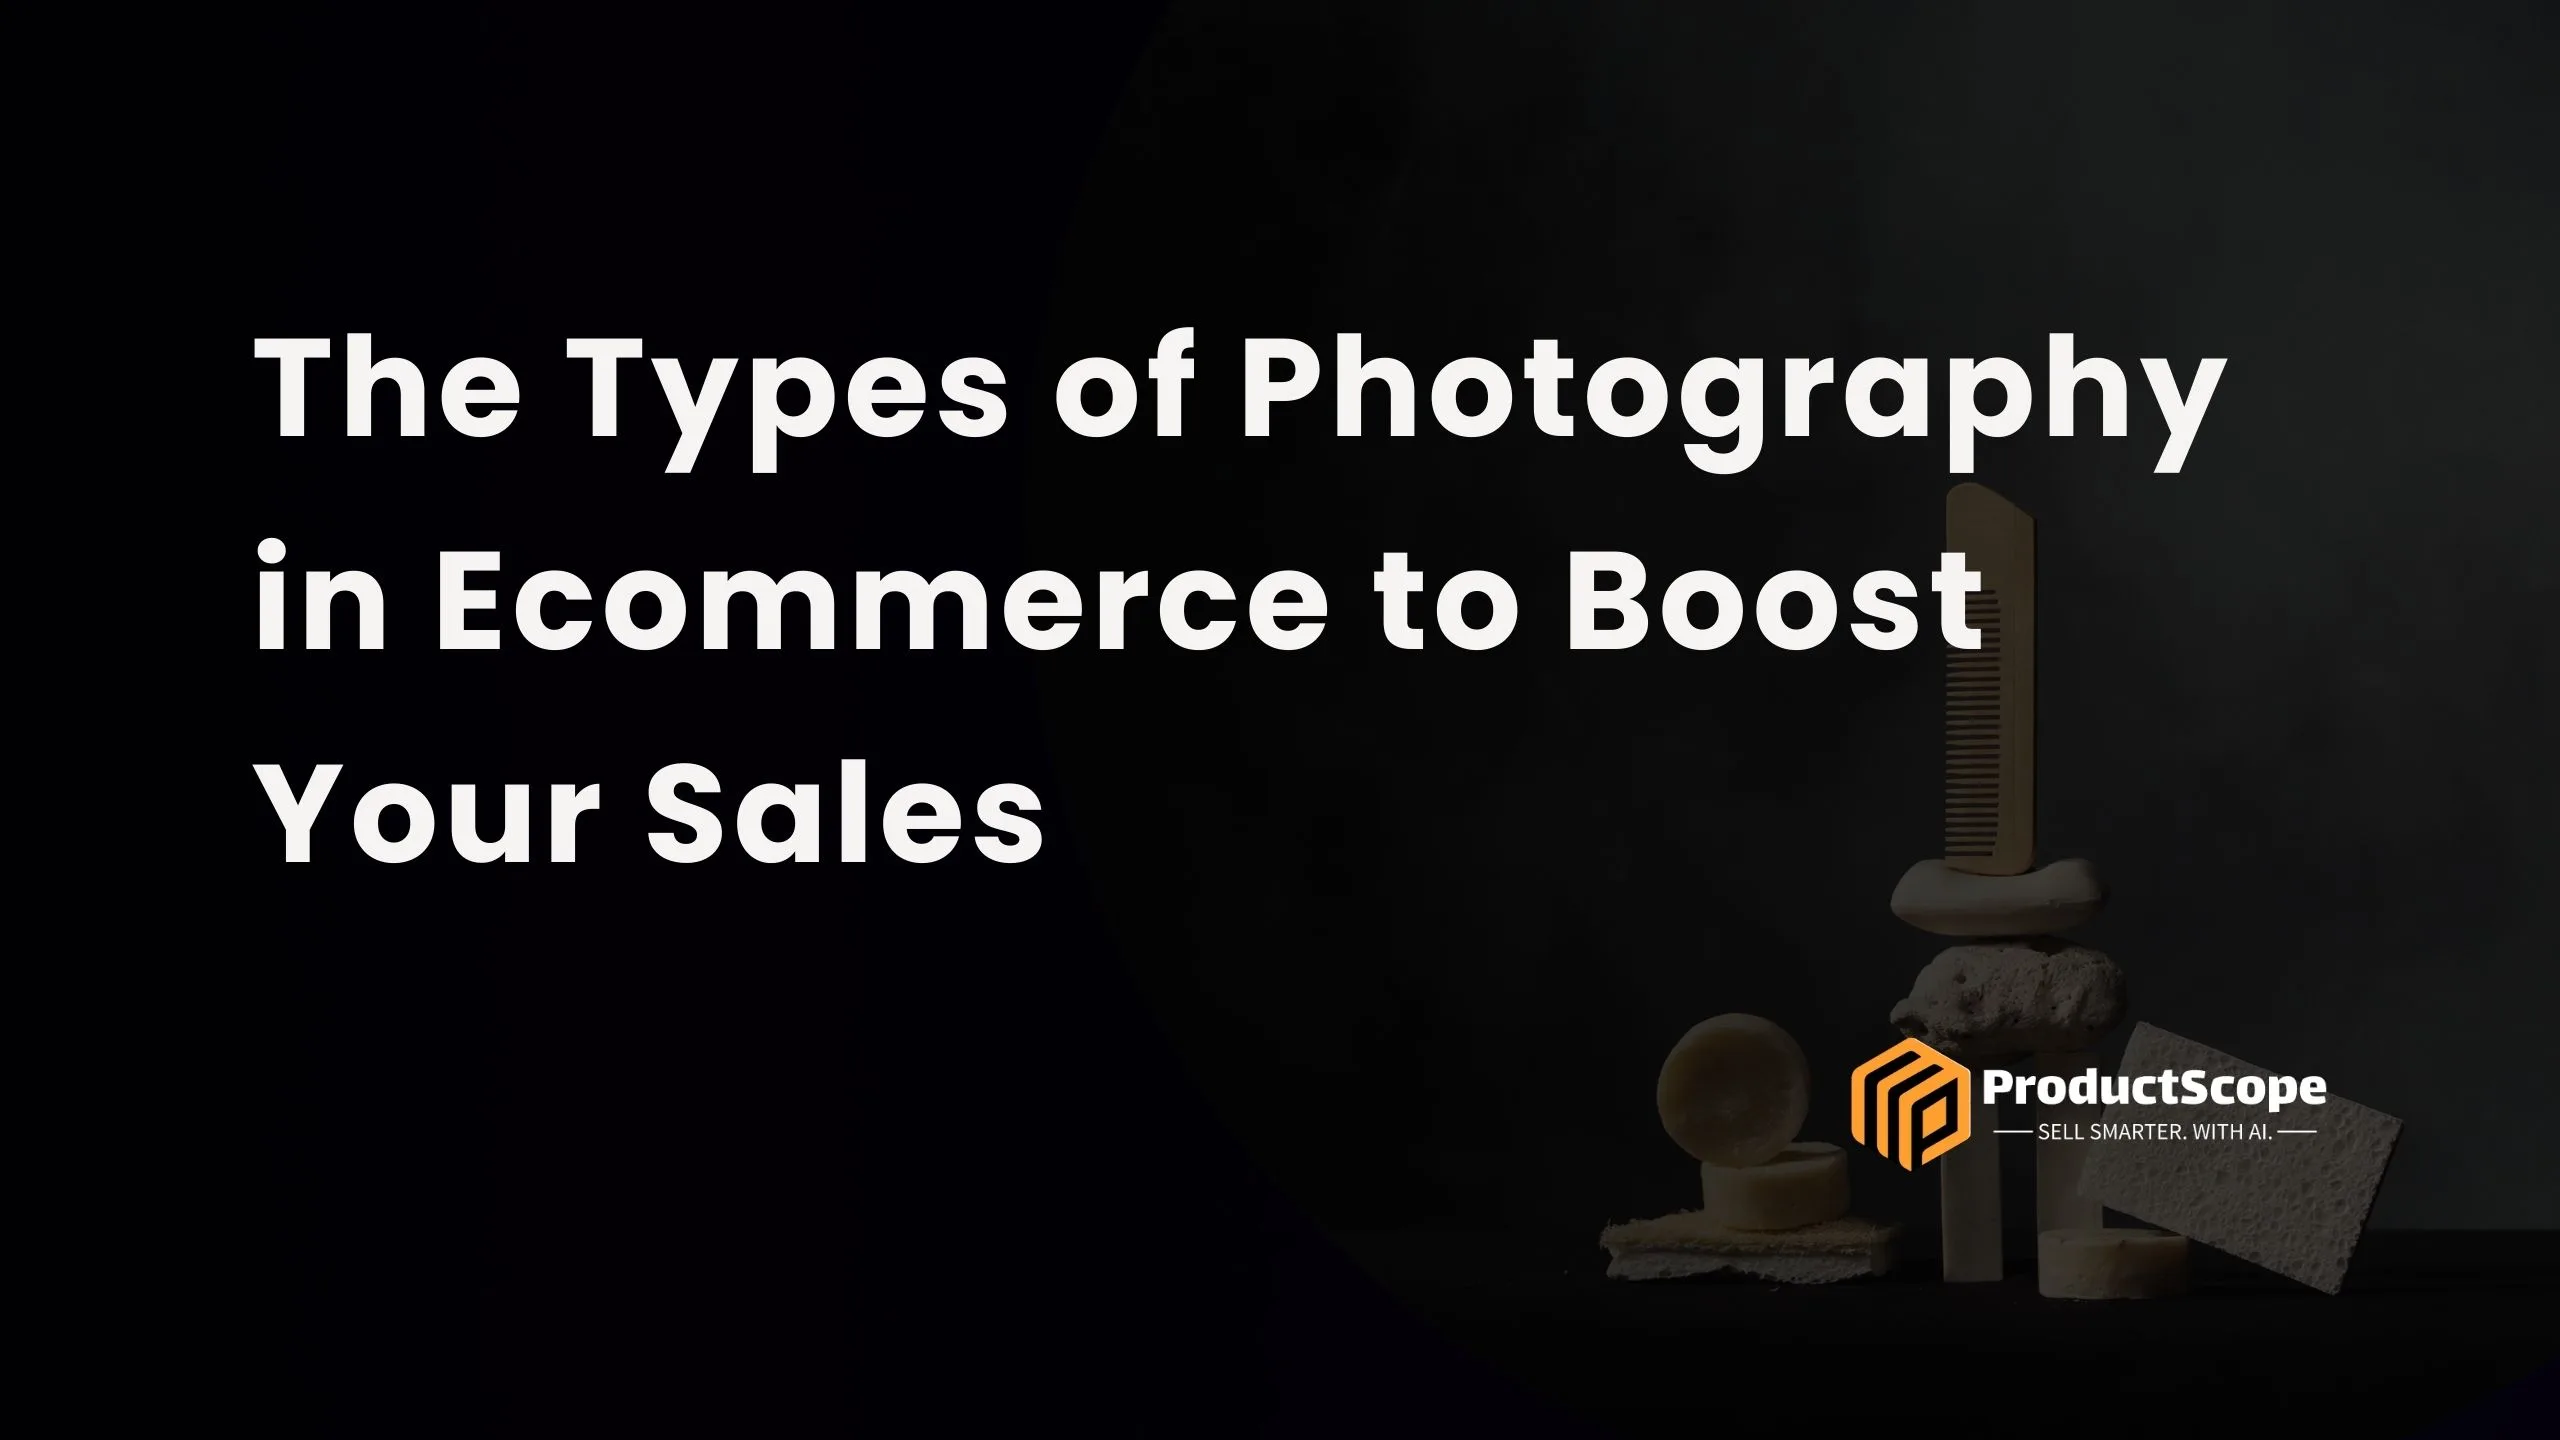 The Types of Photography in Ecommerce to Boost Your Sales